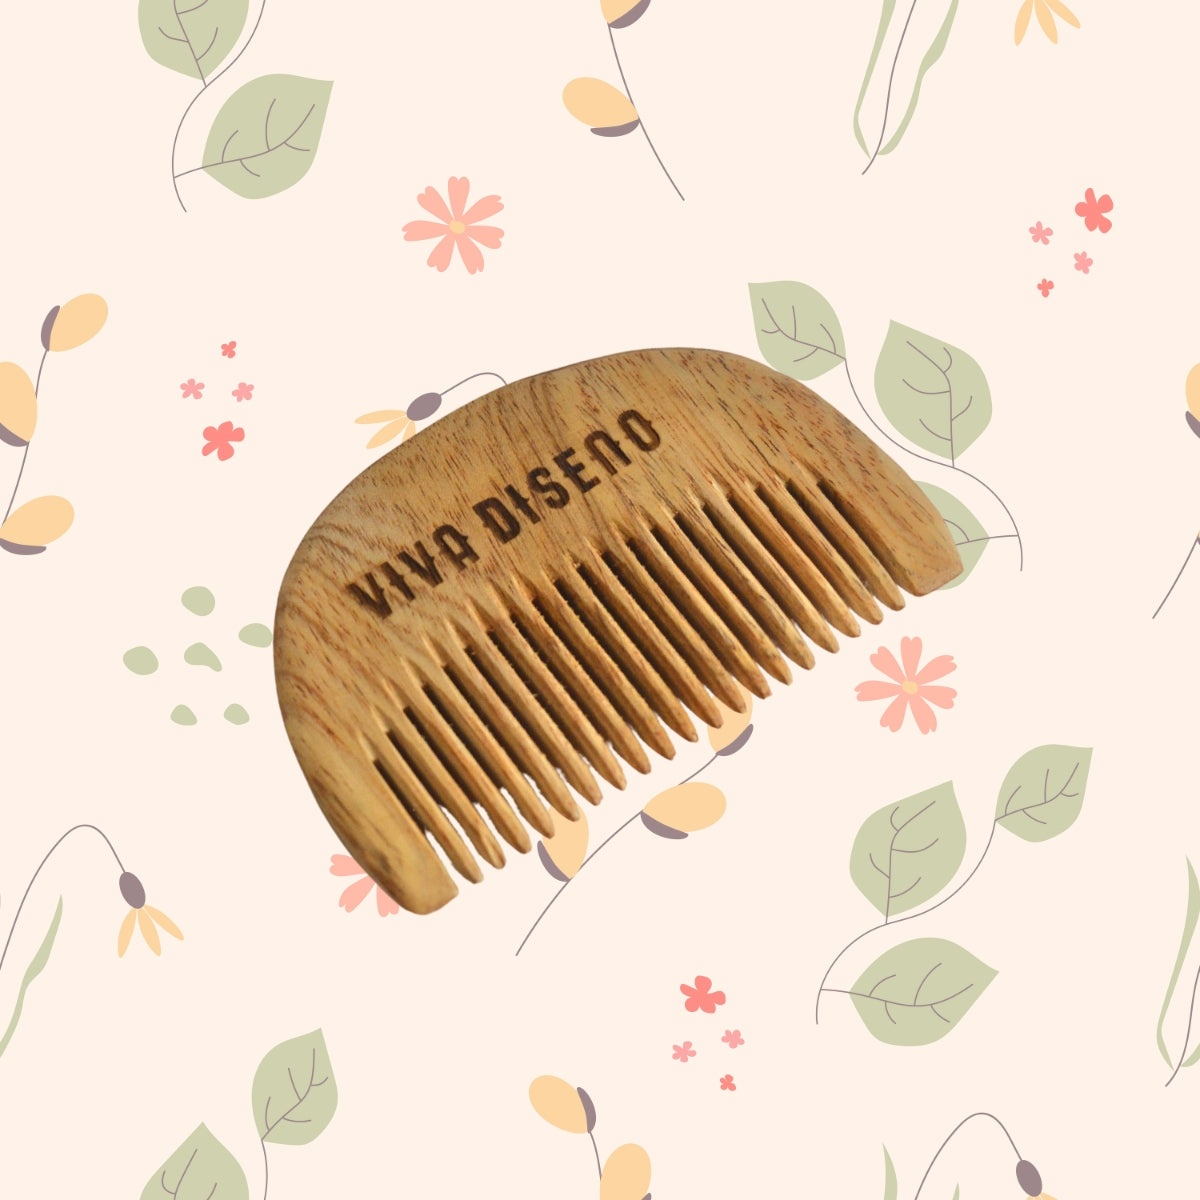 Tiarrah Baby Bliss Neem Wood Comb: Gentle on Hair - The Luxury Bath and Body Care Shop